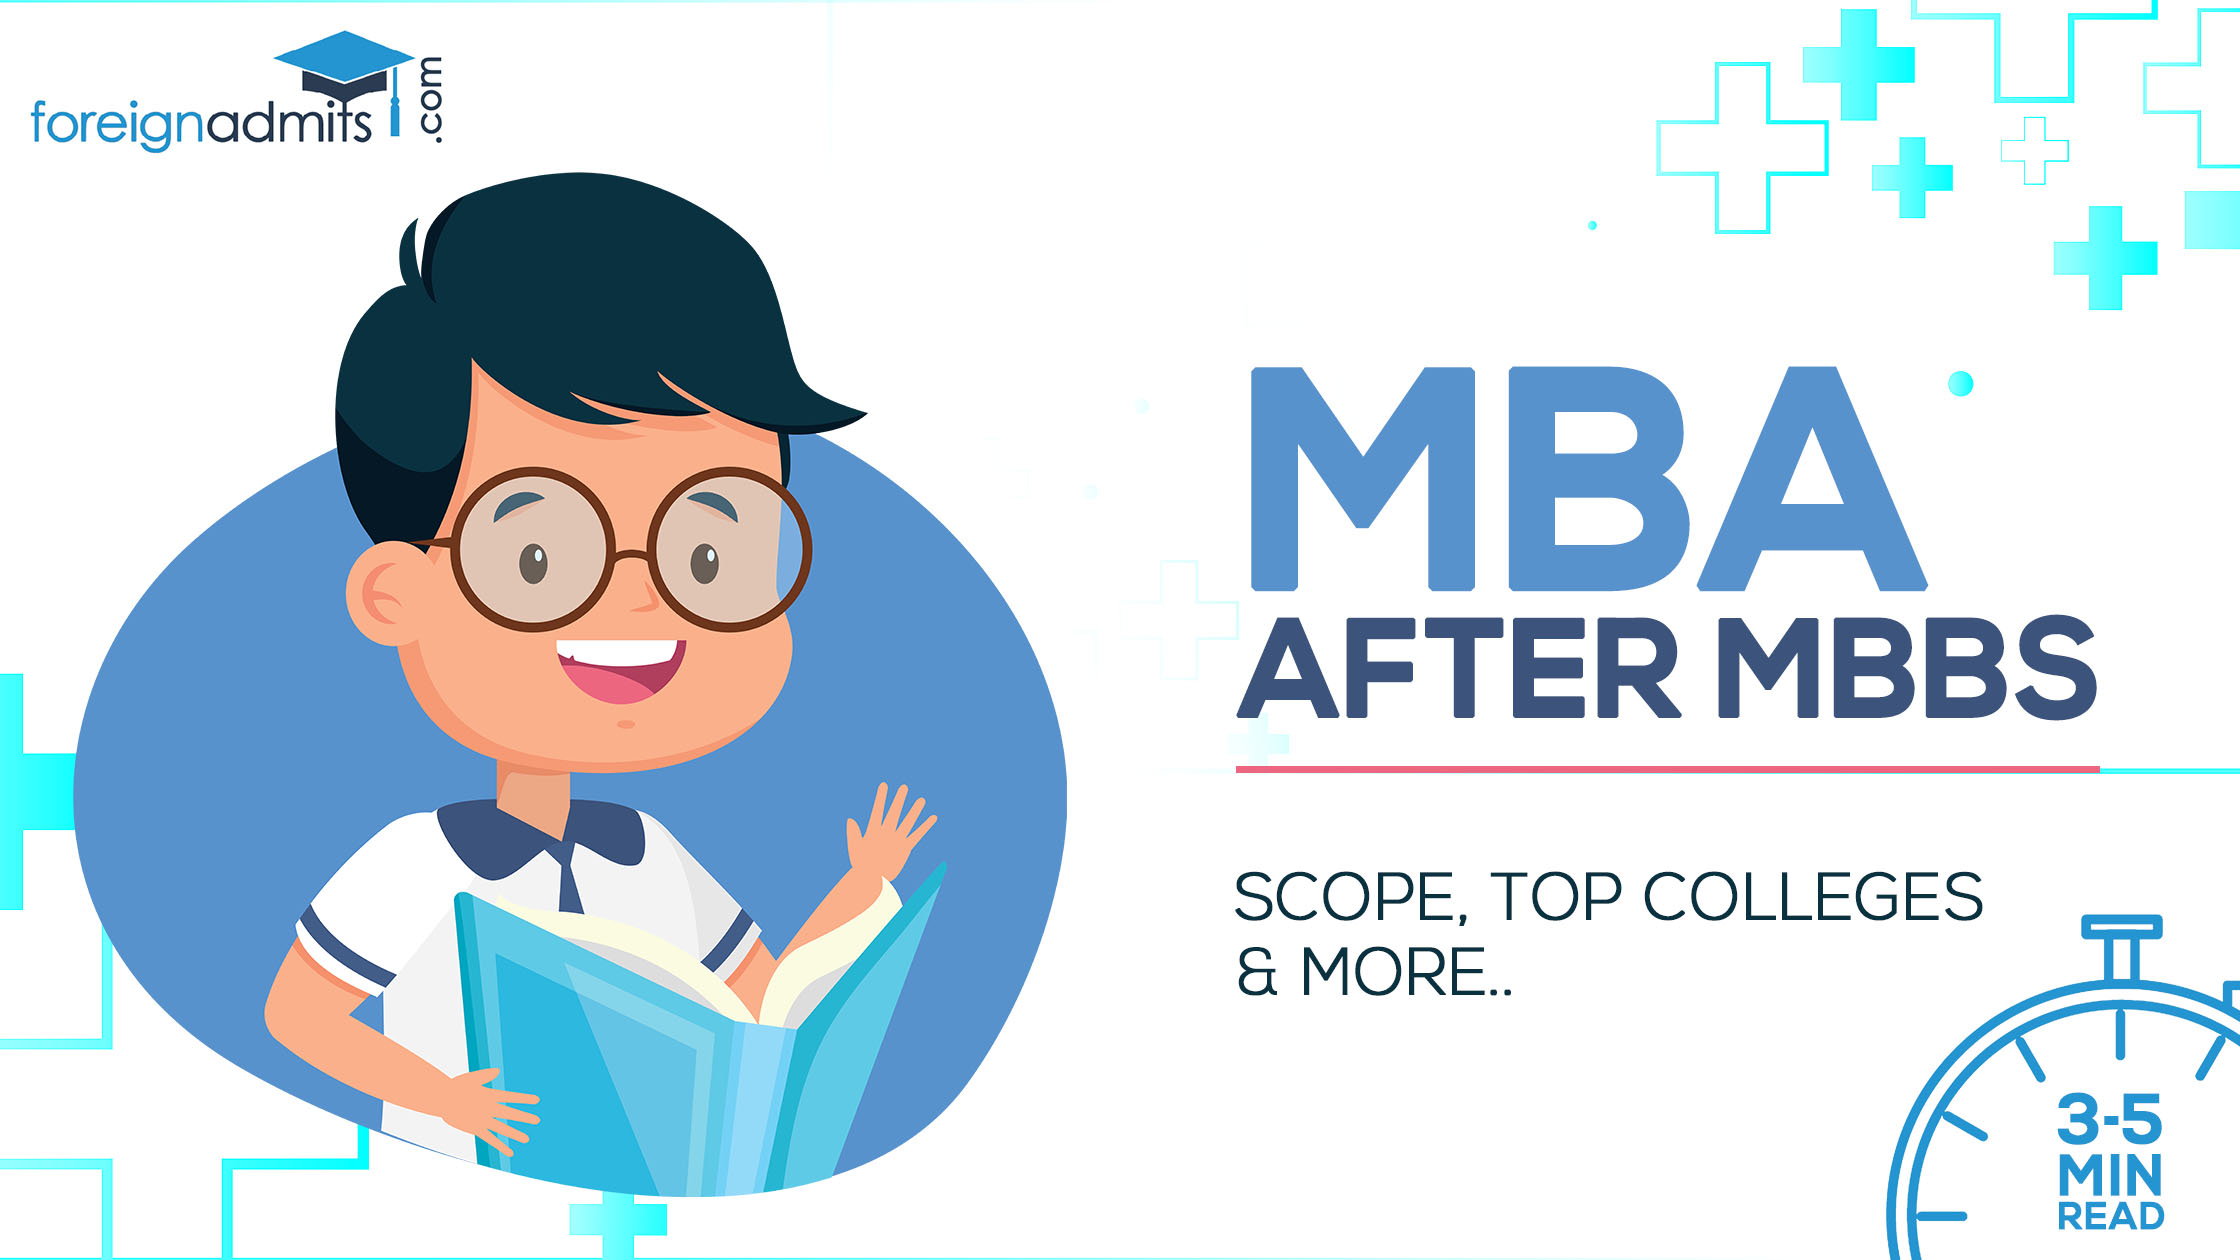 MBA after MBBS – Scope, Top Colleges, and More